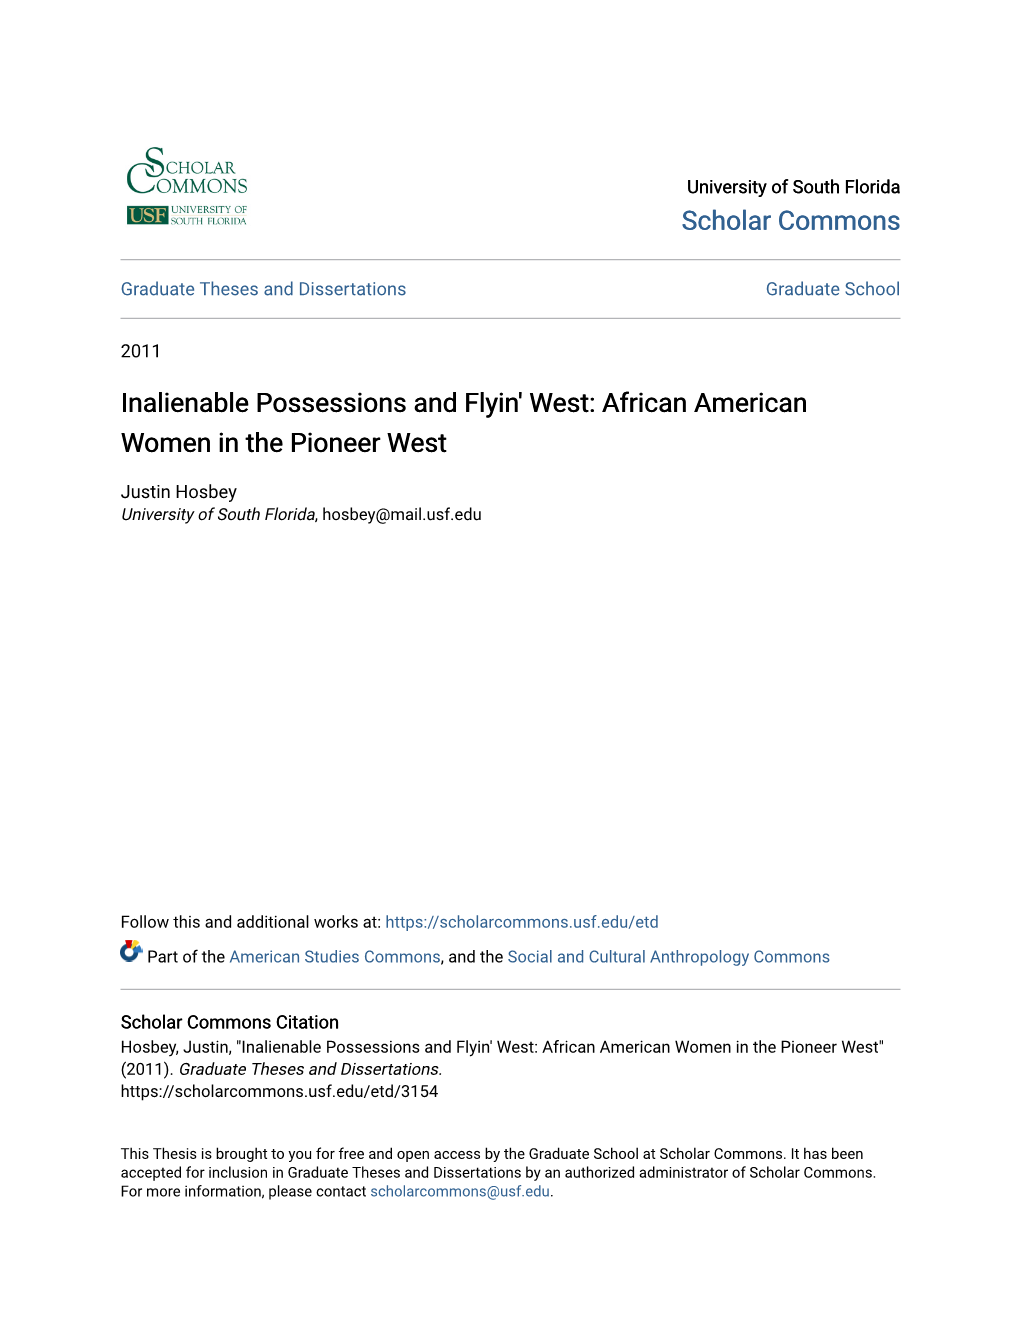 Inalienable Possessions and Flyin' West: African American Women in the Pioneer West